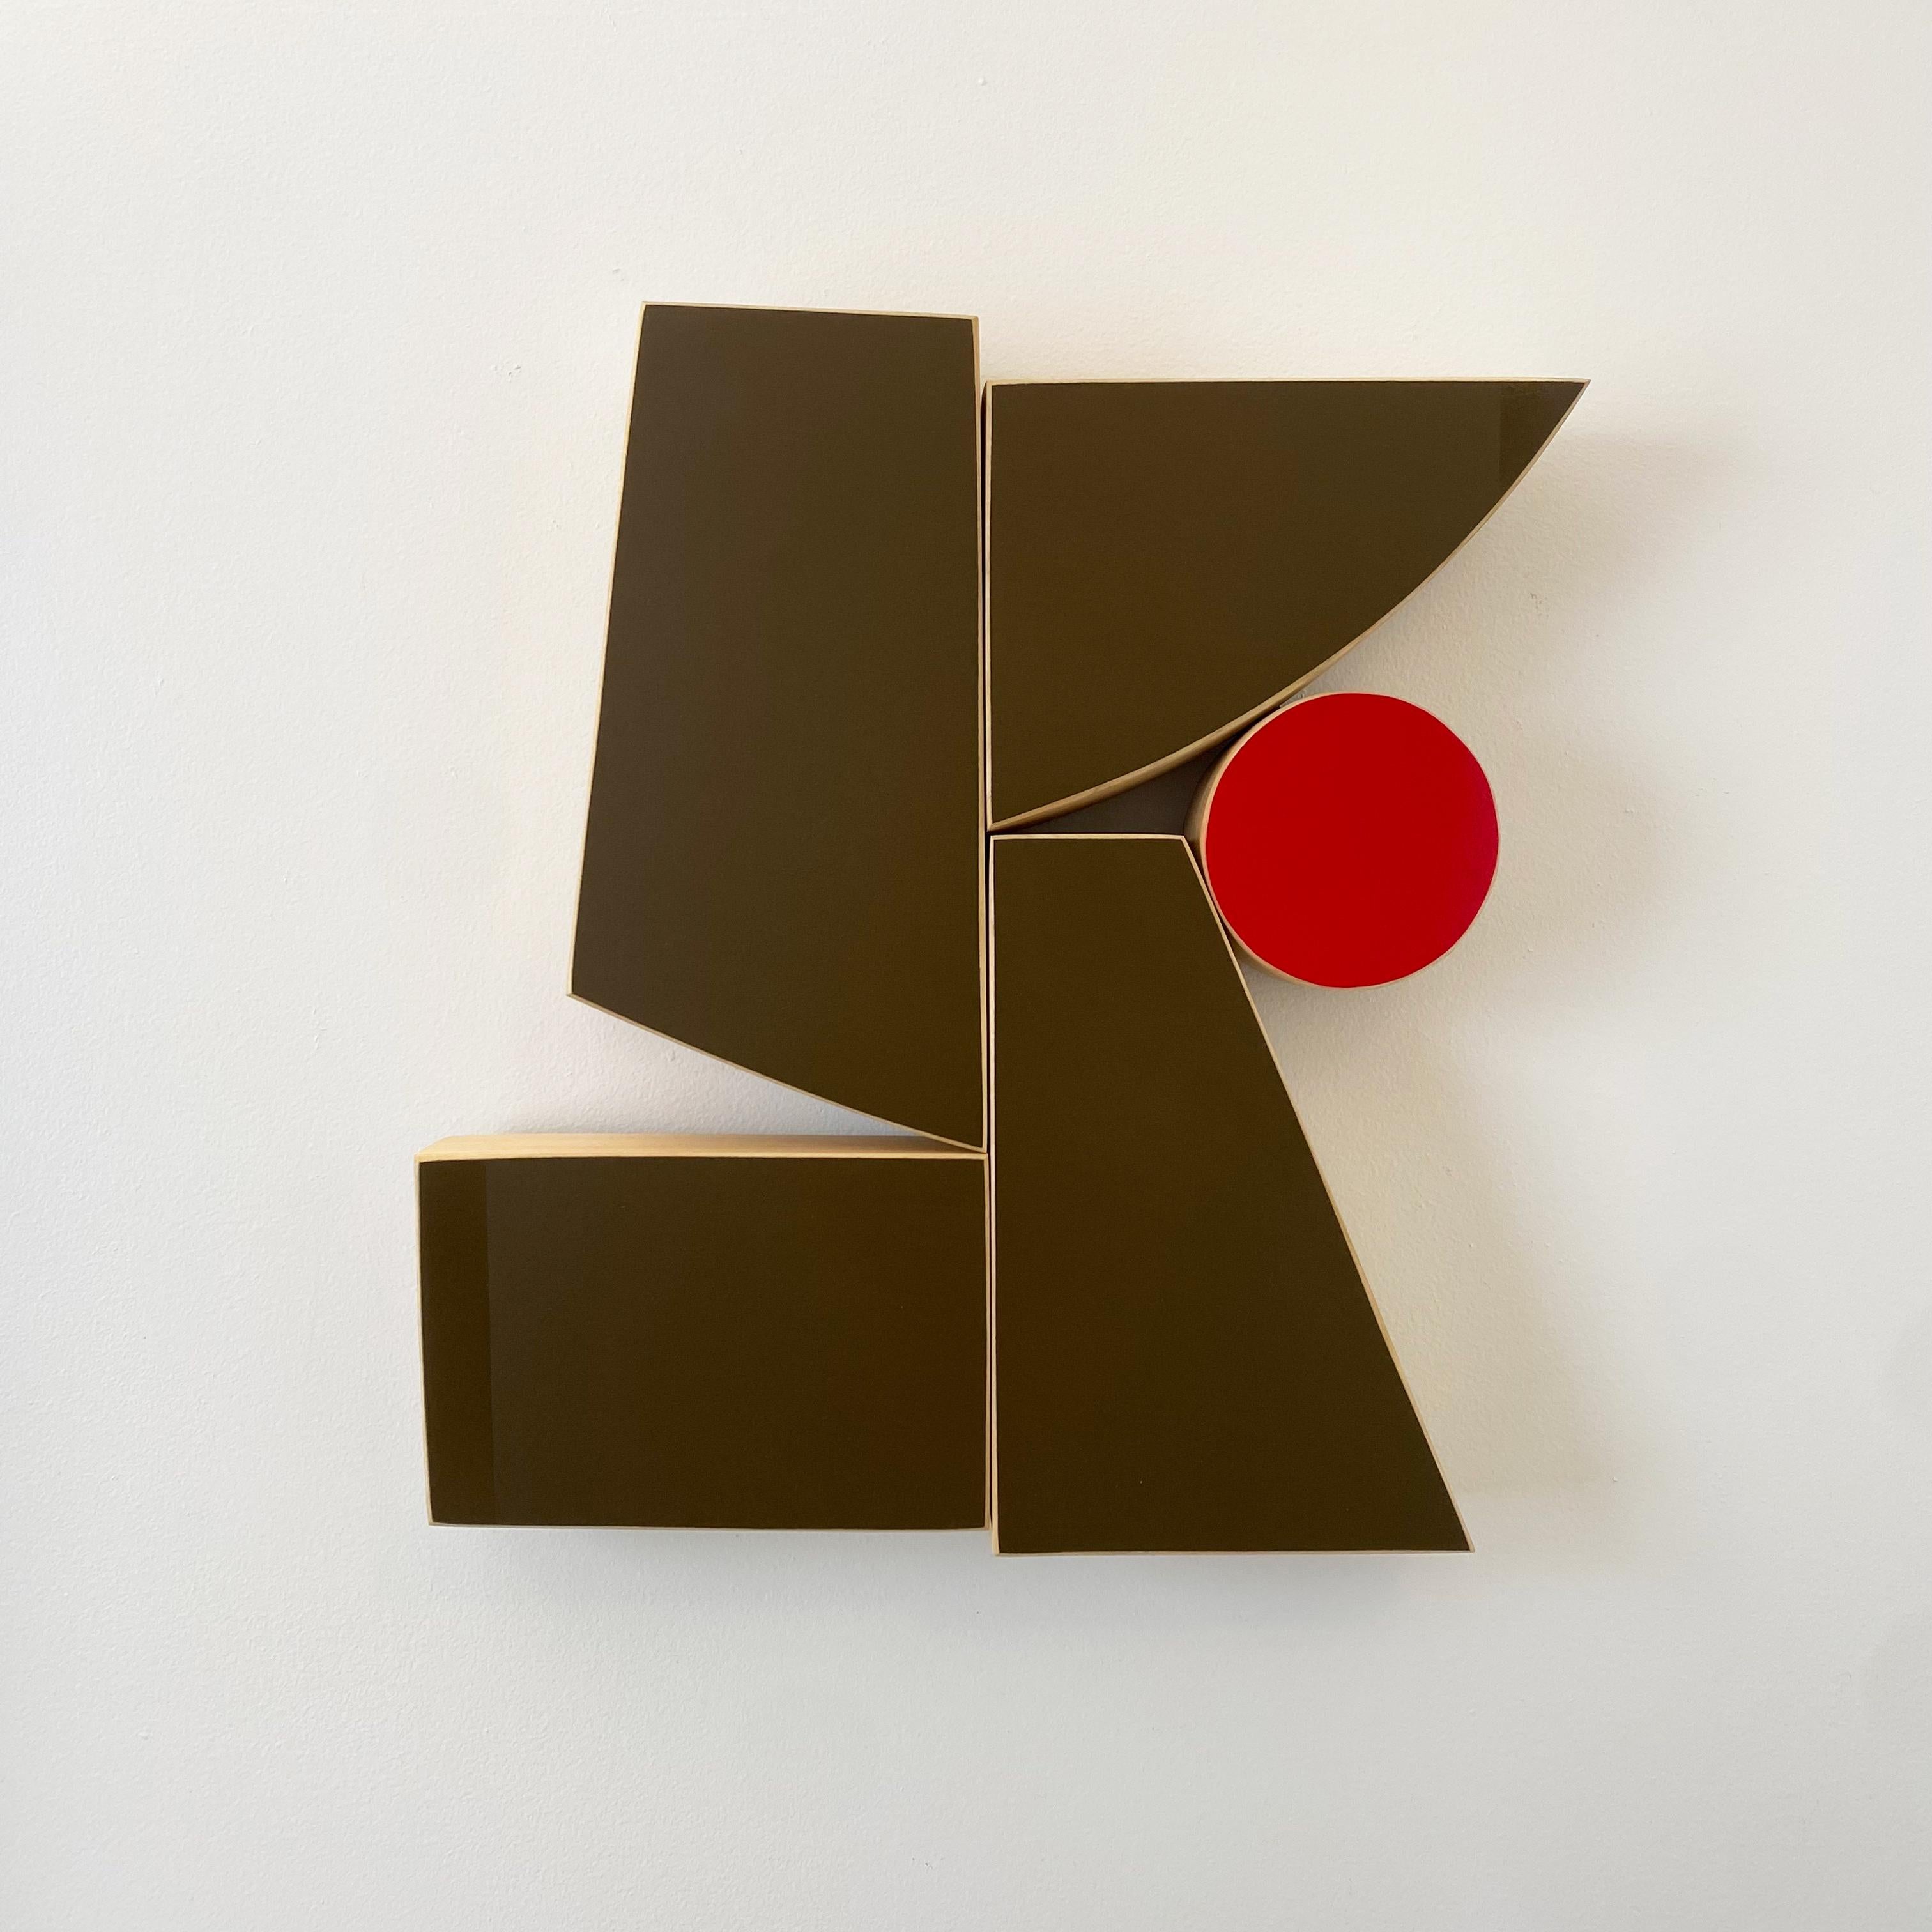 Artwork made with spray acrylic on solid poplar

Small Pop series are minimalist driven, wood wall sculptures that are small and blocky and feature bright saturated colors. The pieces was inspired by my love for simple bold colors and modernist